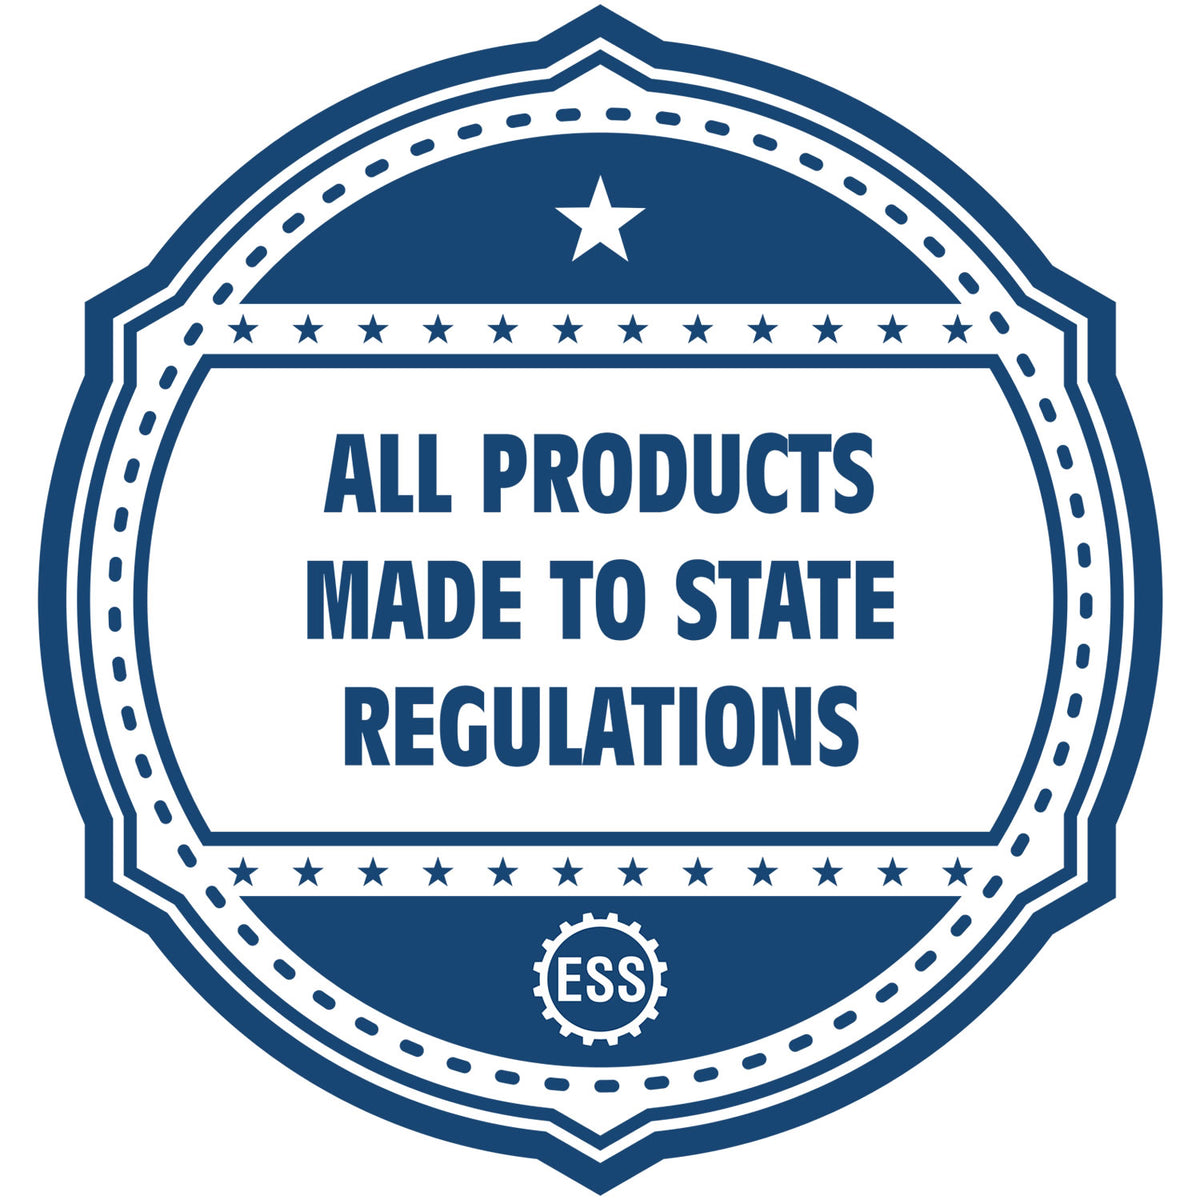 An icon or badge element for the Premium MaxLight Pre-Inked Missouri Landscape Architectural Stamp showing that this product is made in compliance with state regulations.